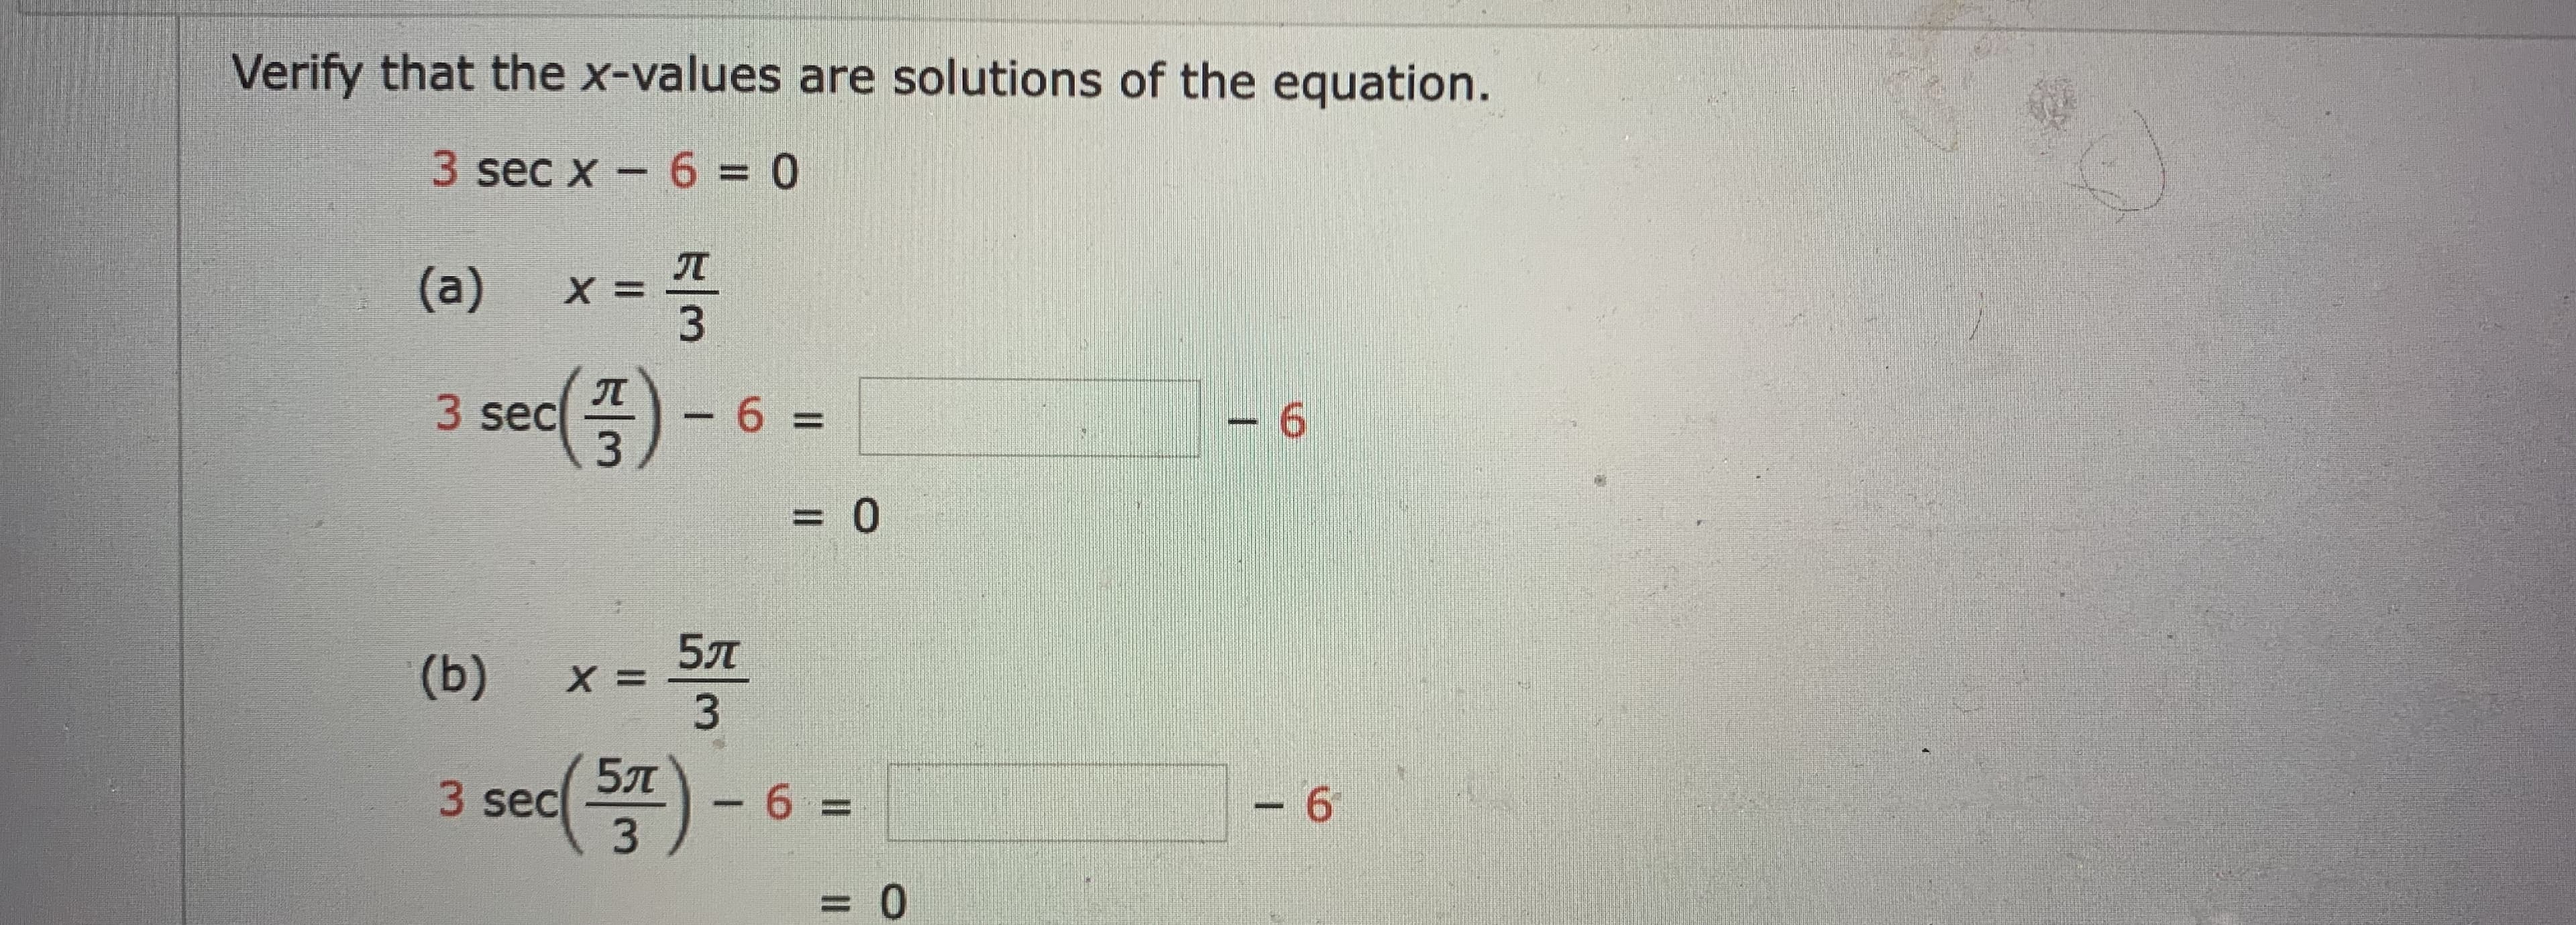 Verify that the x-values are solutions of the equation.
3 sec x - 6 = 0
%3D
